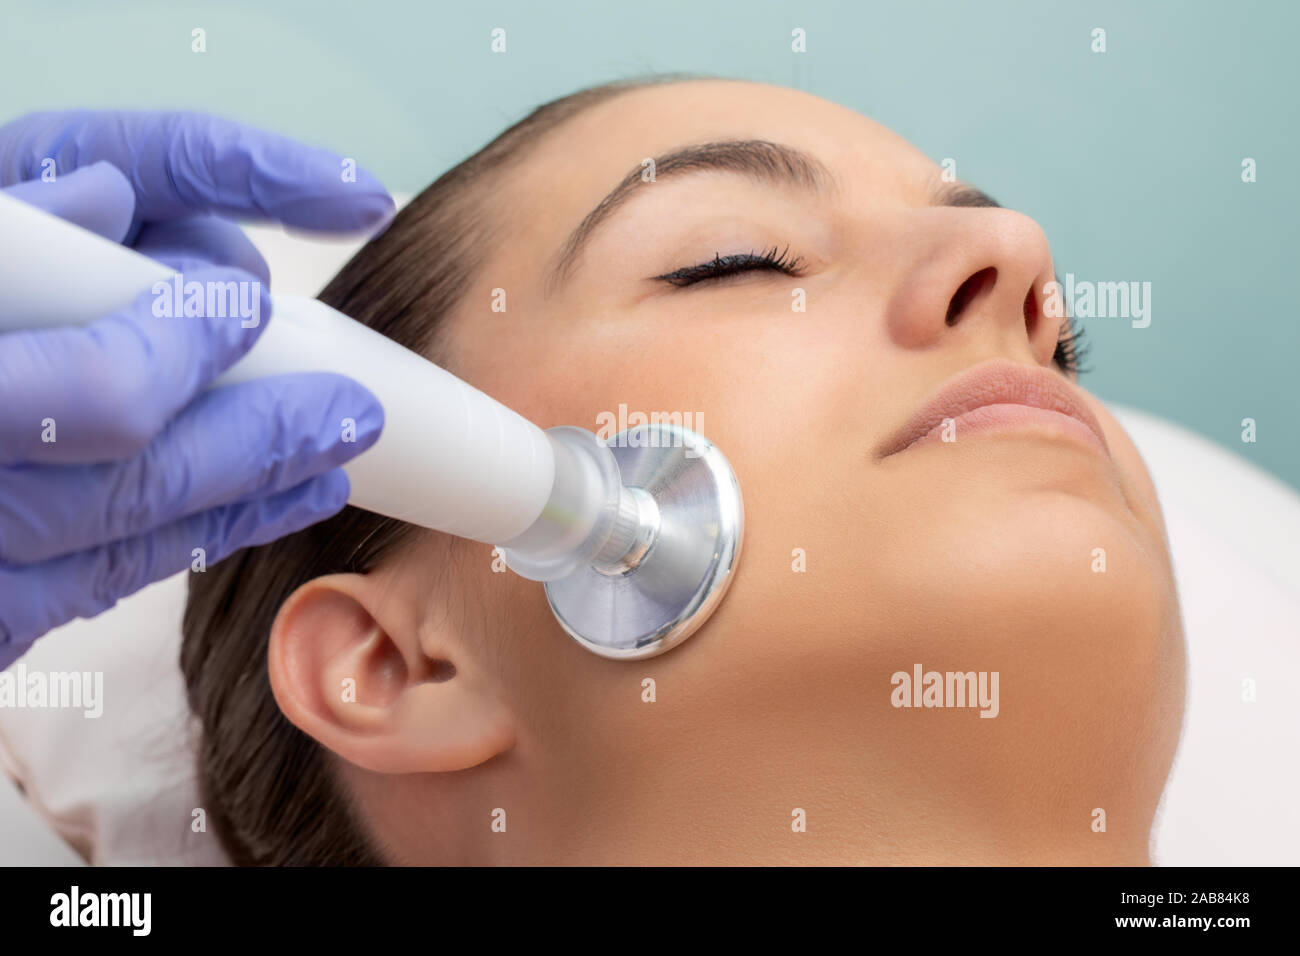 Macro close up of woman having facial mesotherapy. Therapist applying flat head plasma pen on side of face. Stock Photo